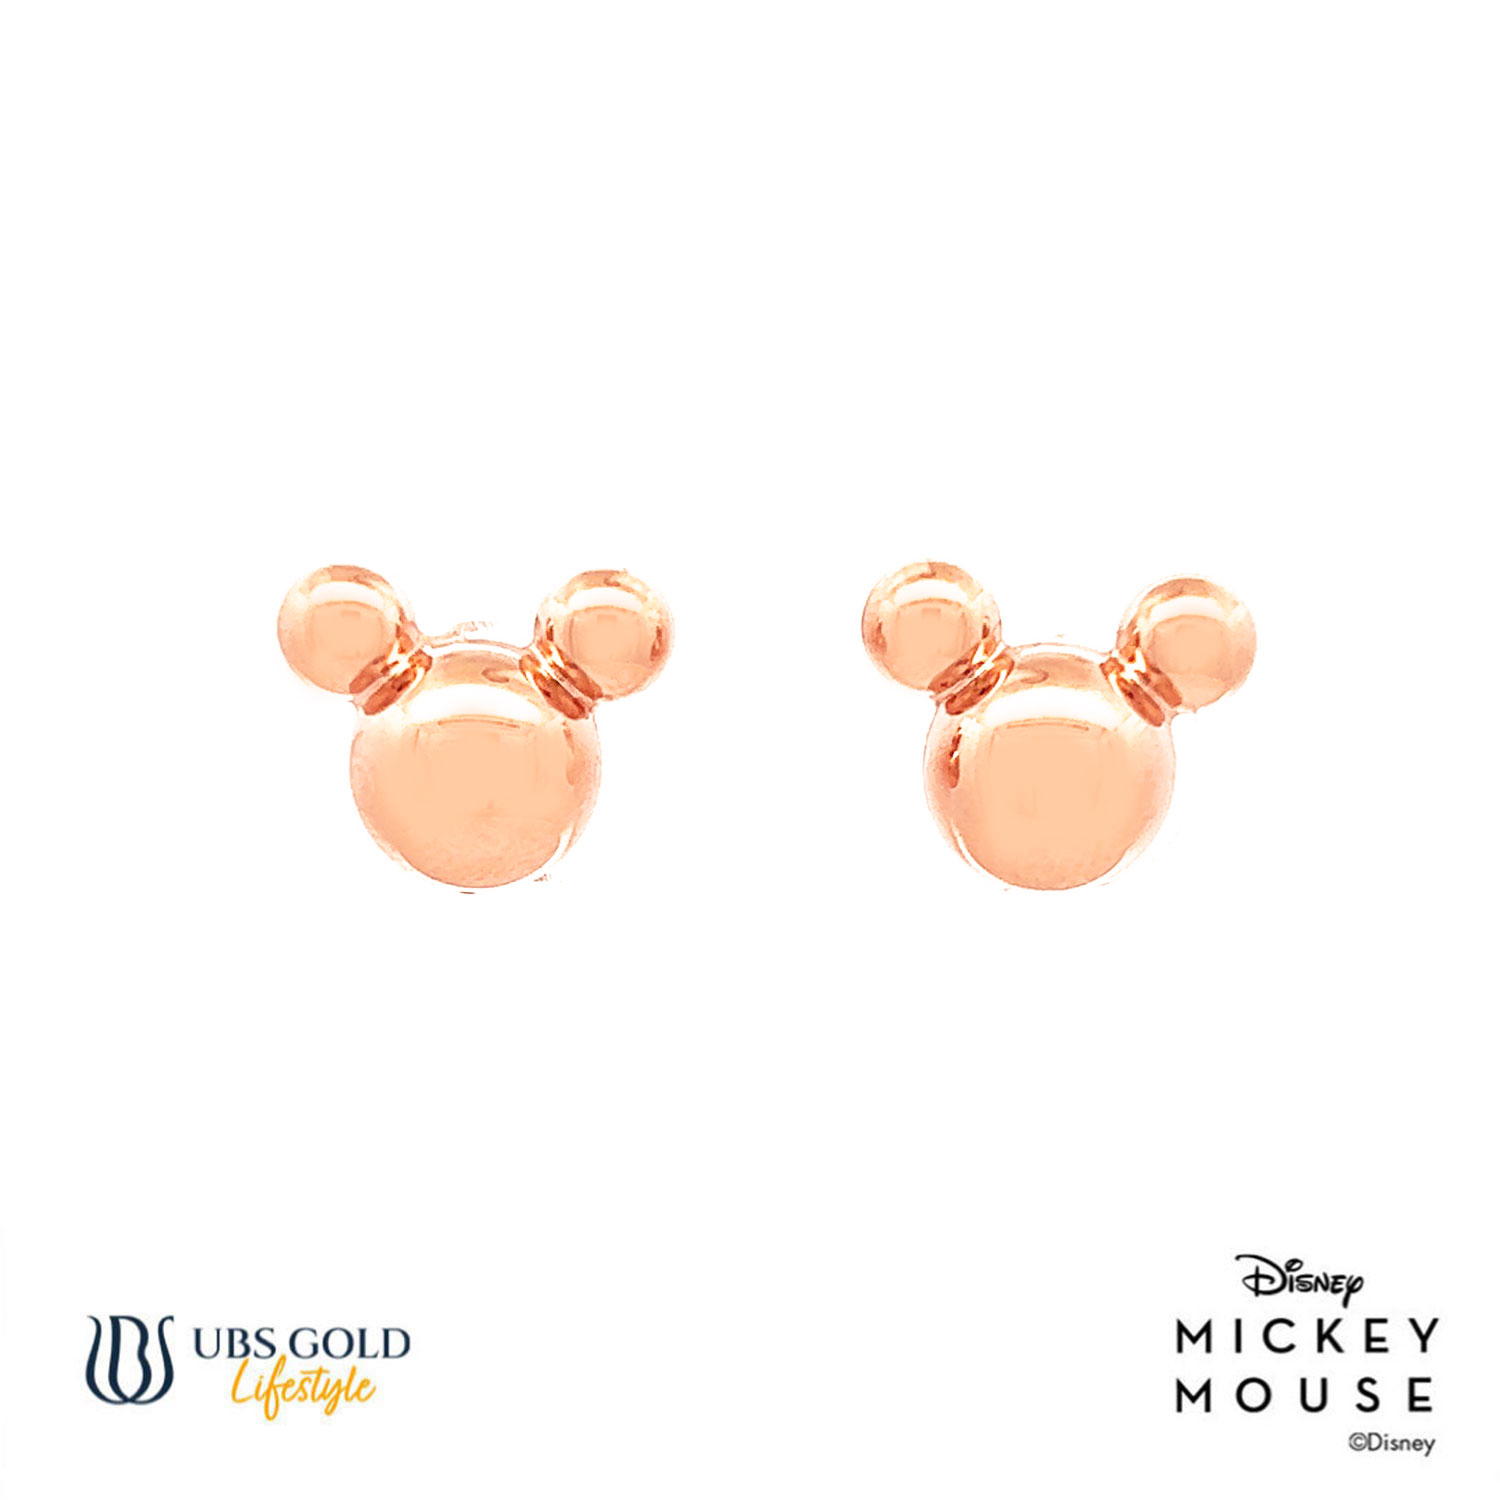 UBS Gold Anting Emas Disney Mickey Mouse - Awy0023 - 17K